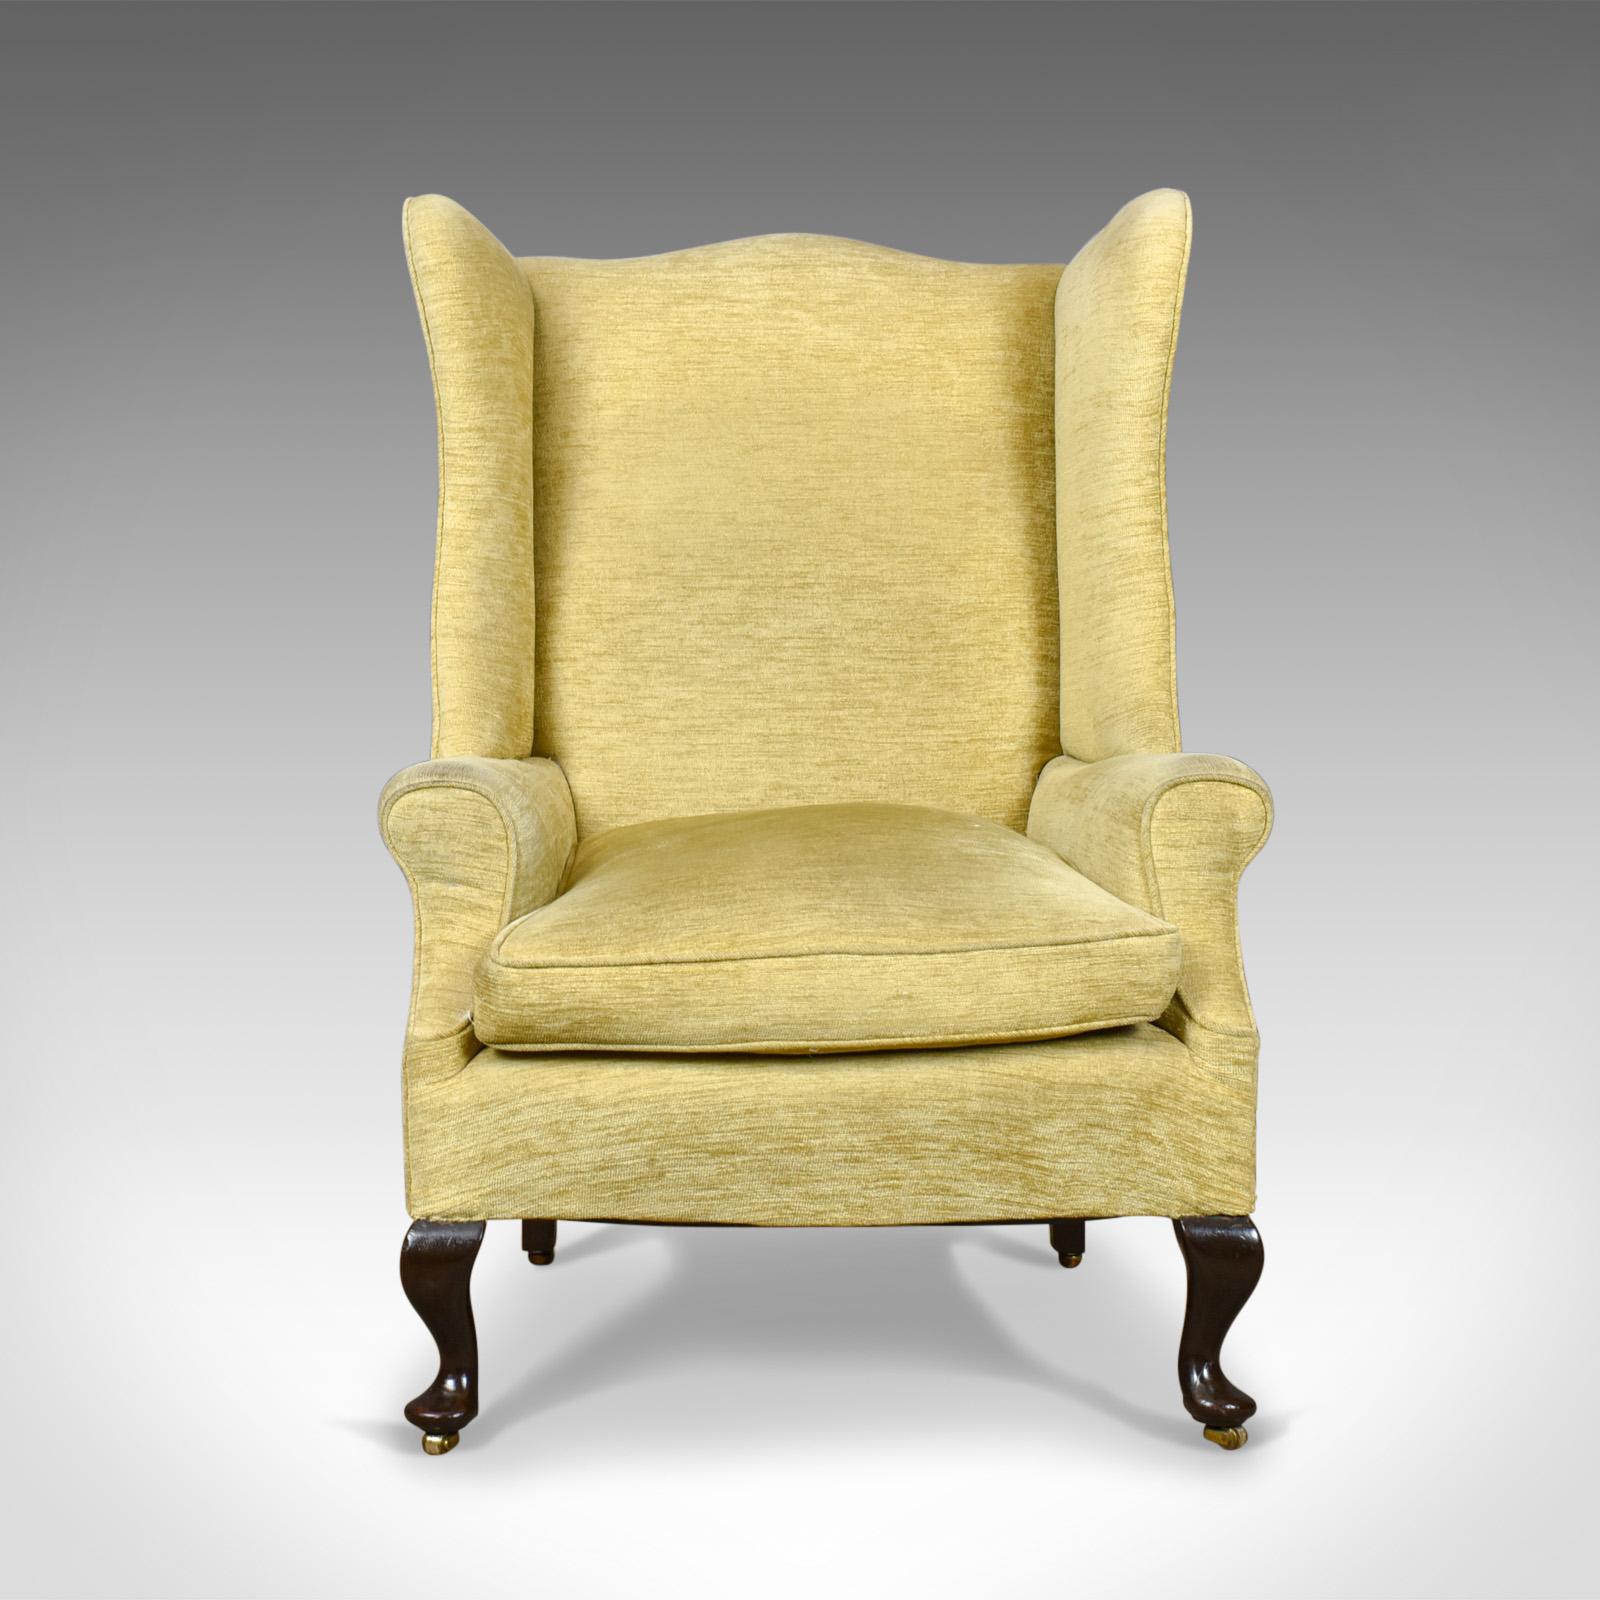 This is an antique wing back armchair, a late Victorian easy chair dating to the turn of the century c.1900.

A large comfortable seat with loose feather filled cushion
Traditionally stuffed and well sprung
Finished in a quality pale, corded